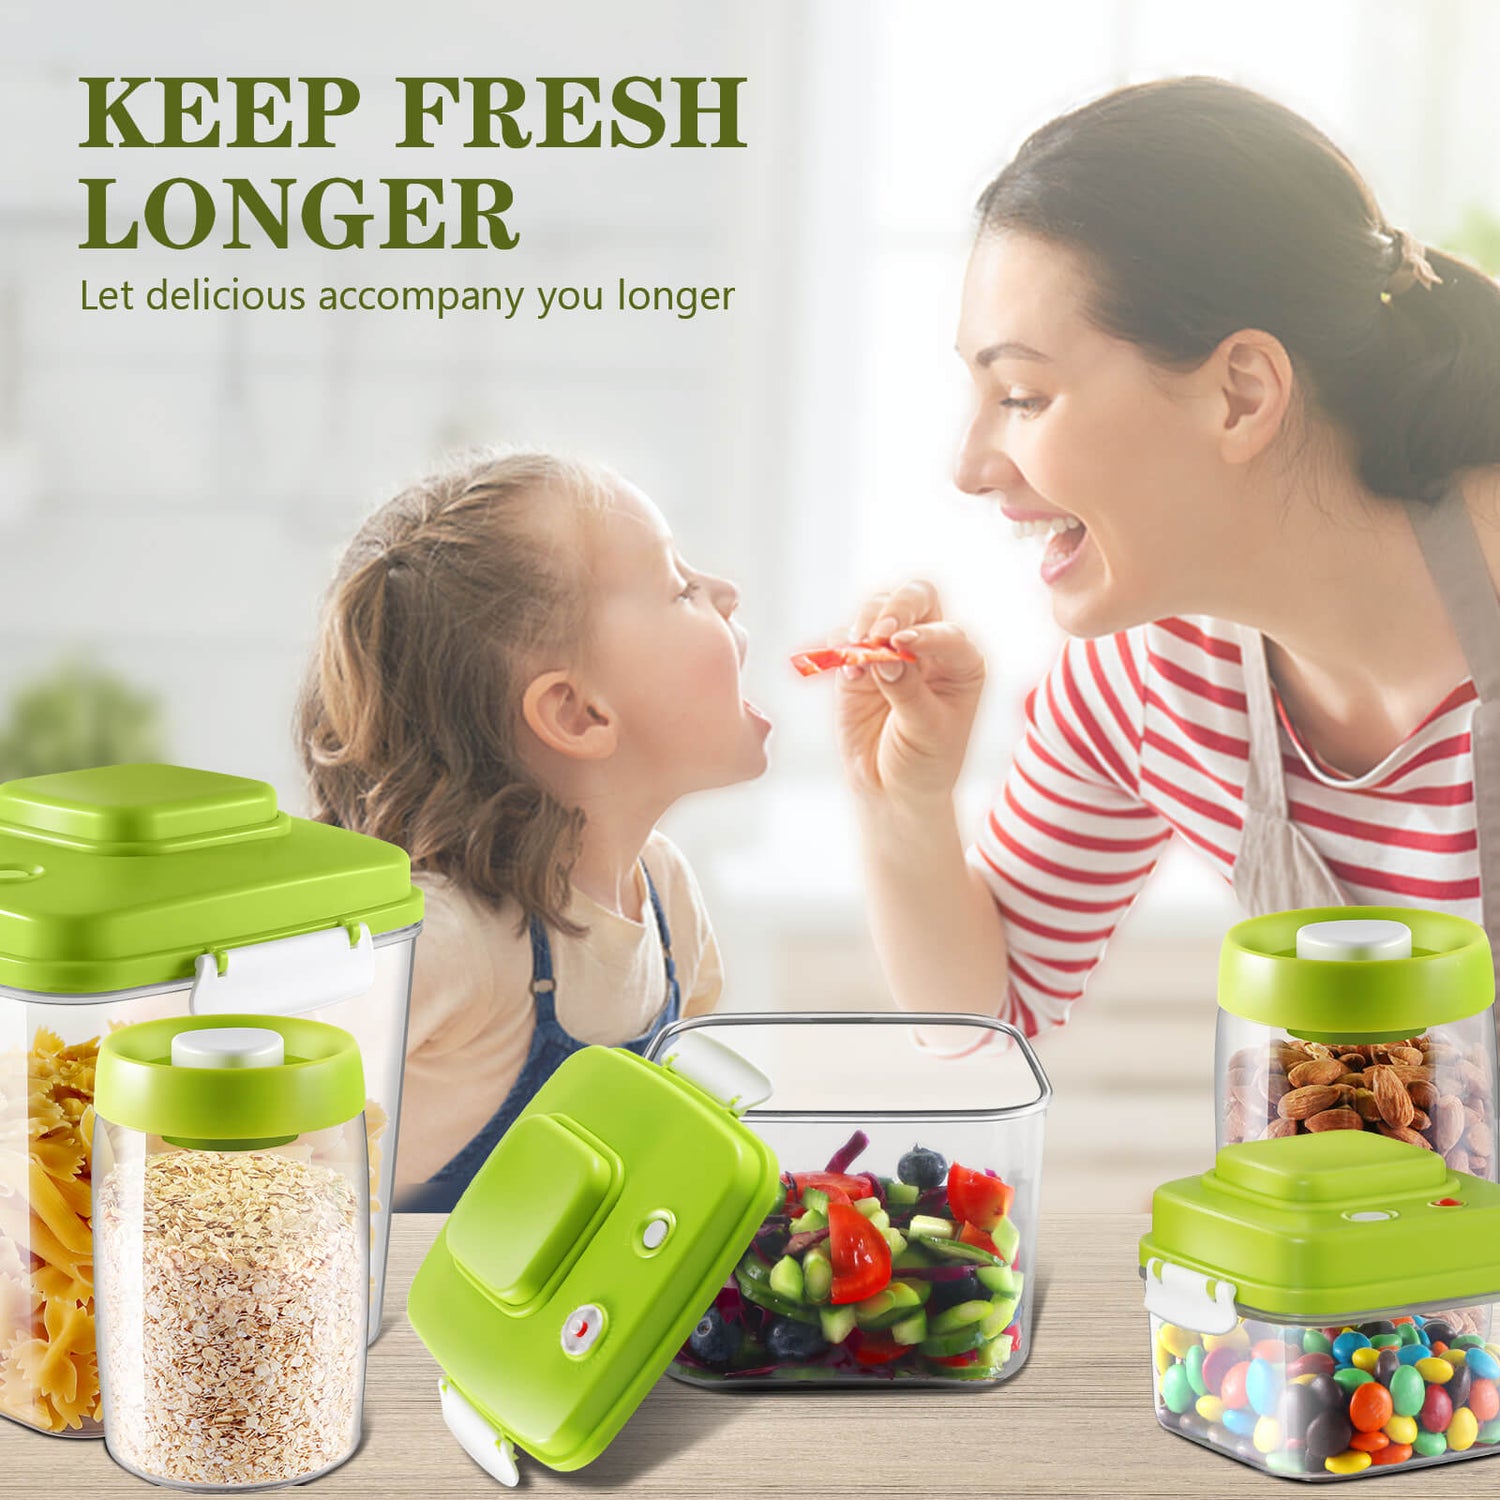 Masthome Airtight Food Storage Containers 5 Piece